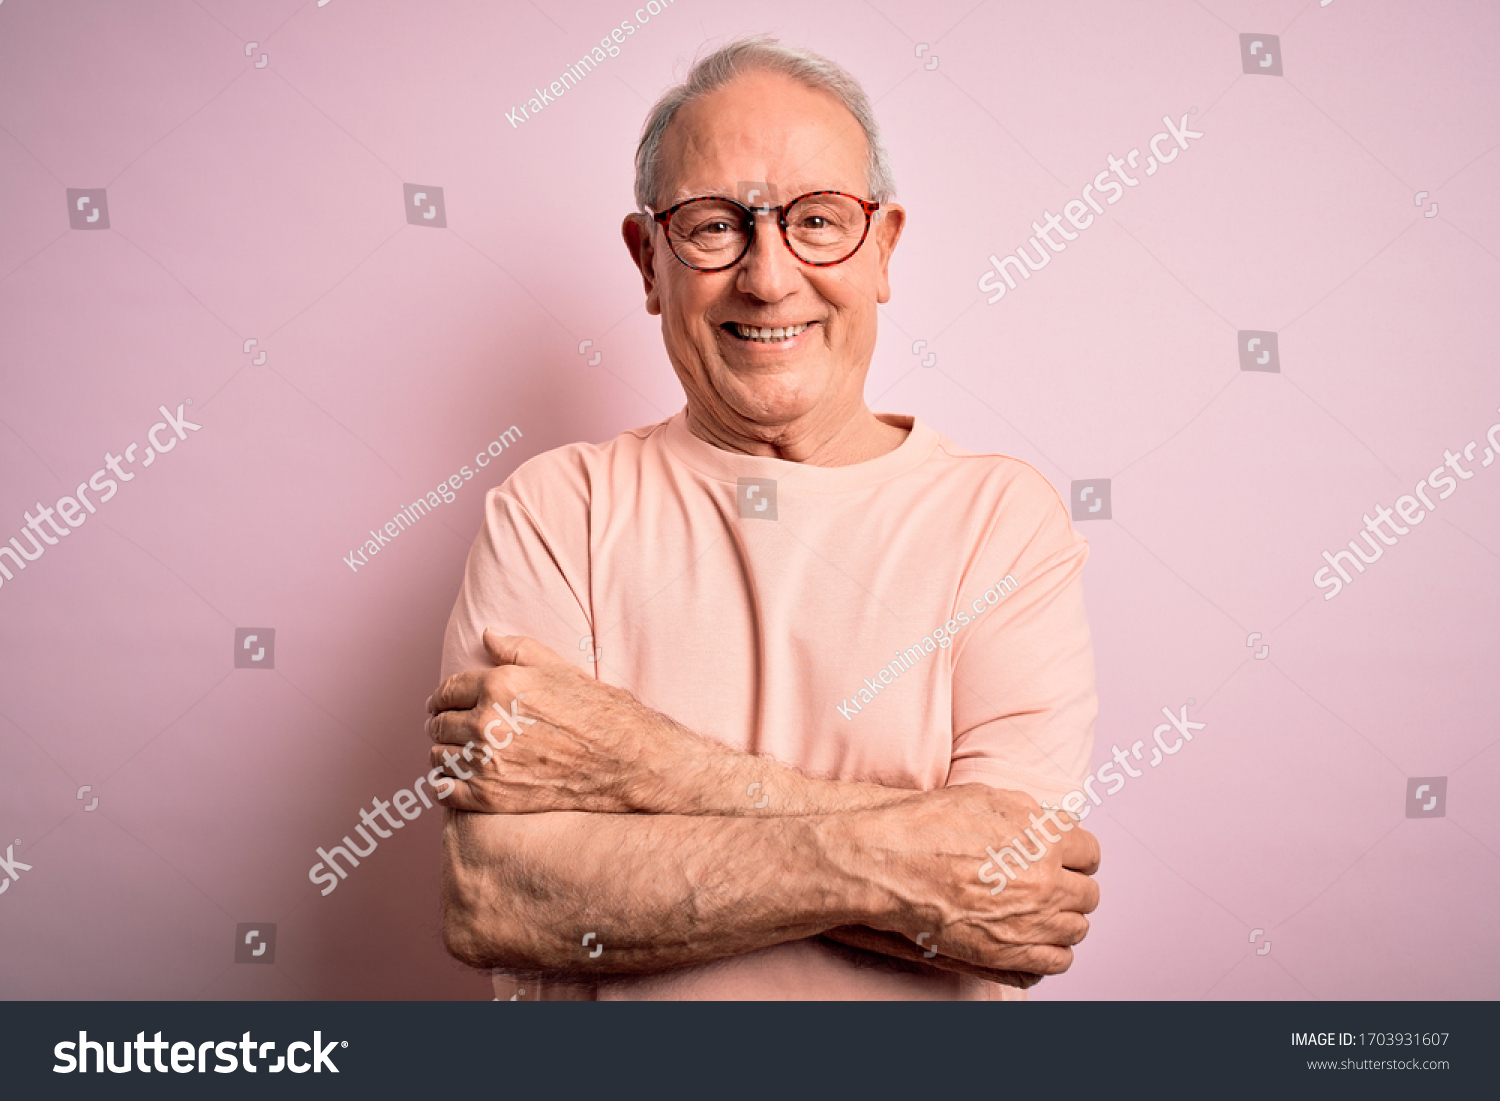 Grey haired senior man wearing glasses standing over pink isolated background happy face smiling with crossed arms looking at the camera. Positive person. #1703931607